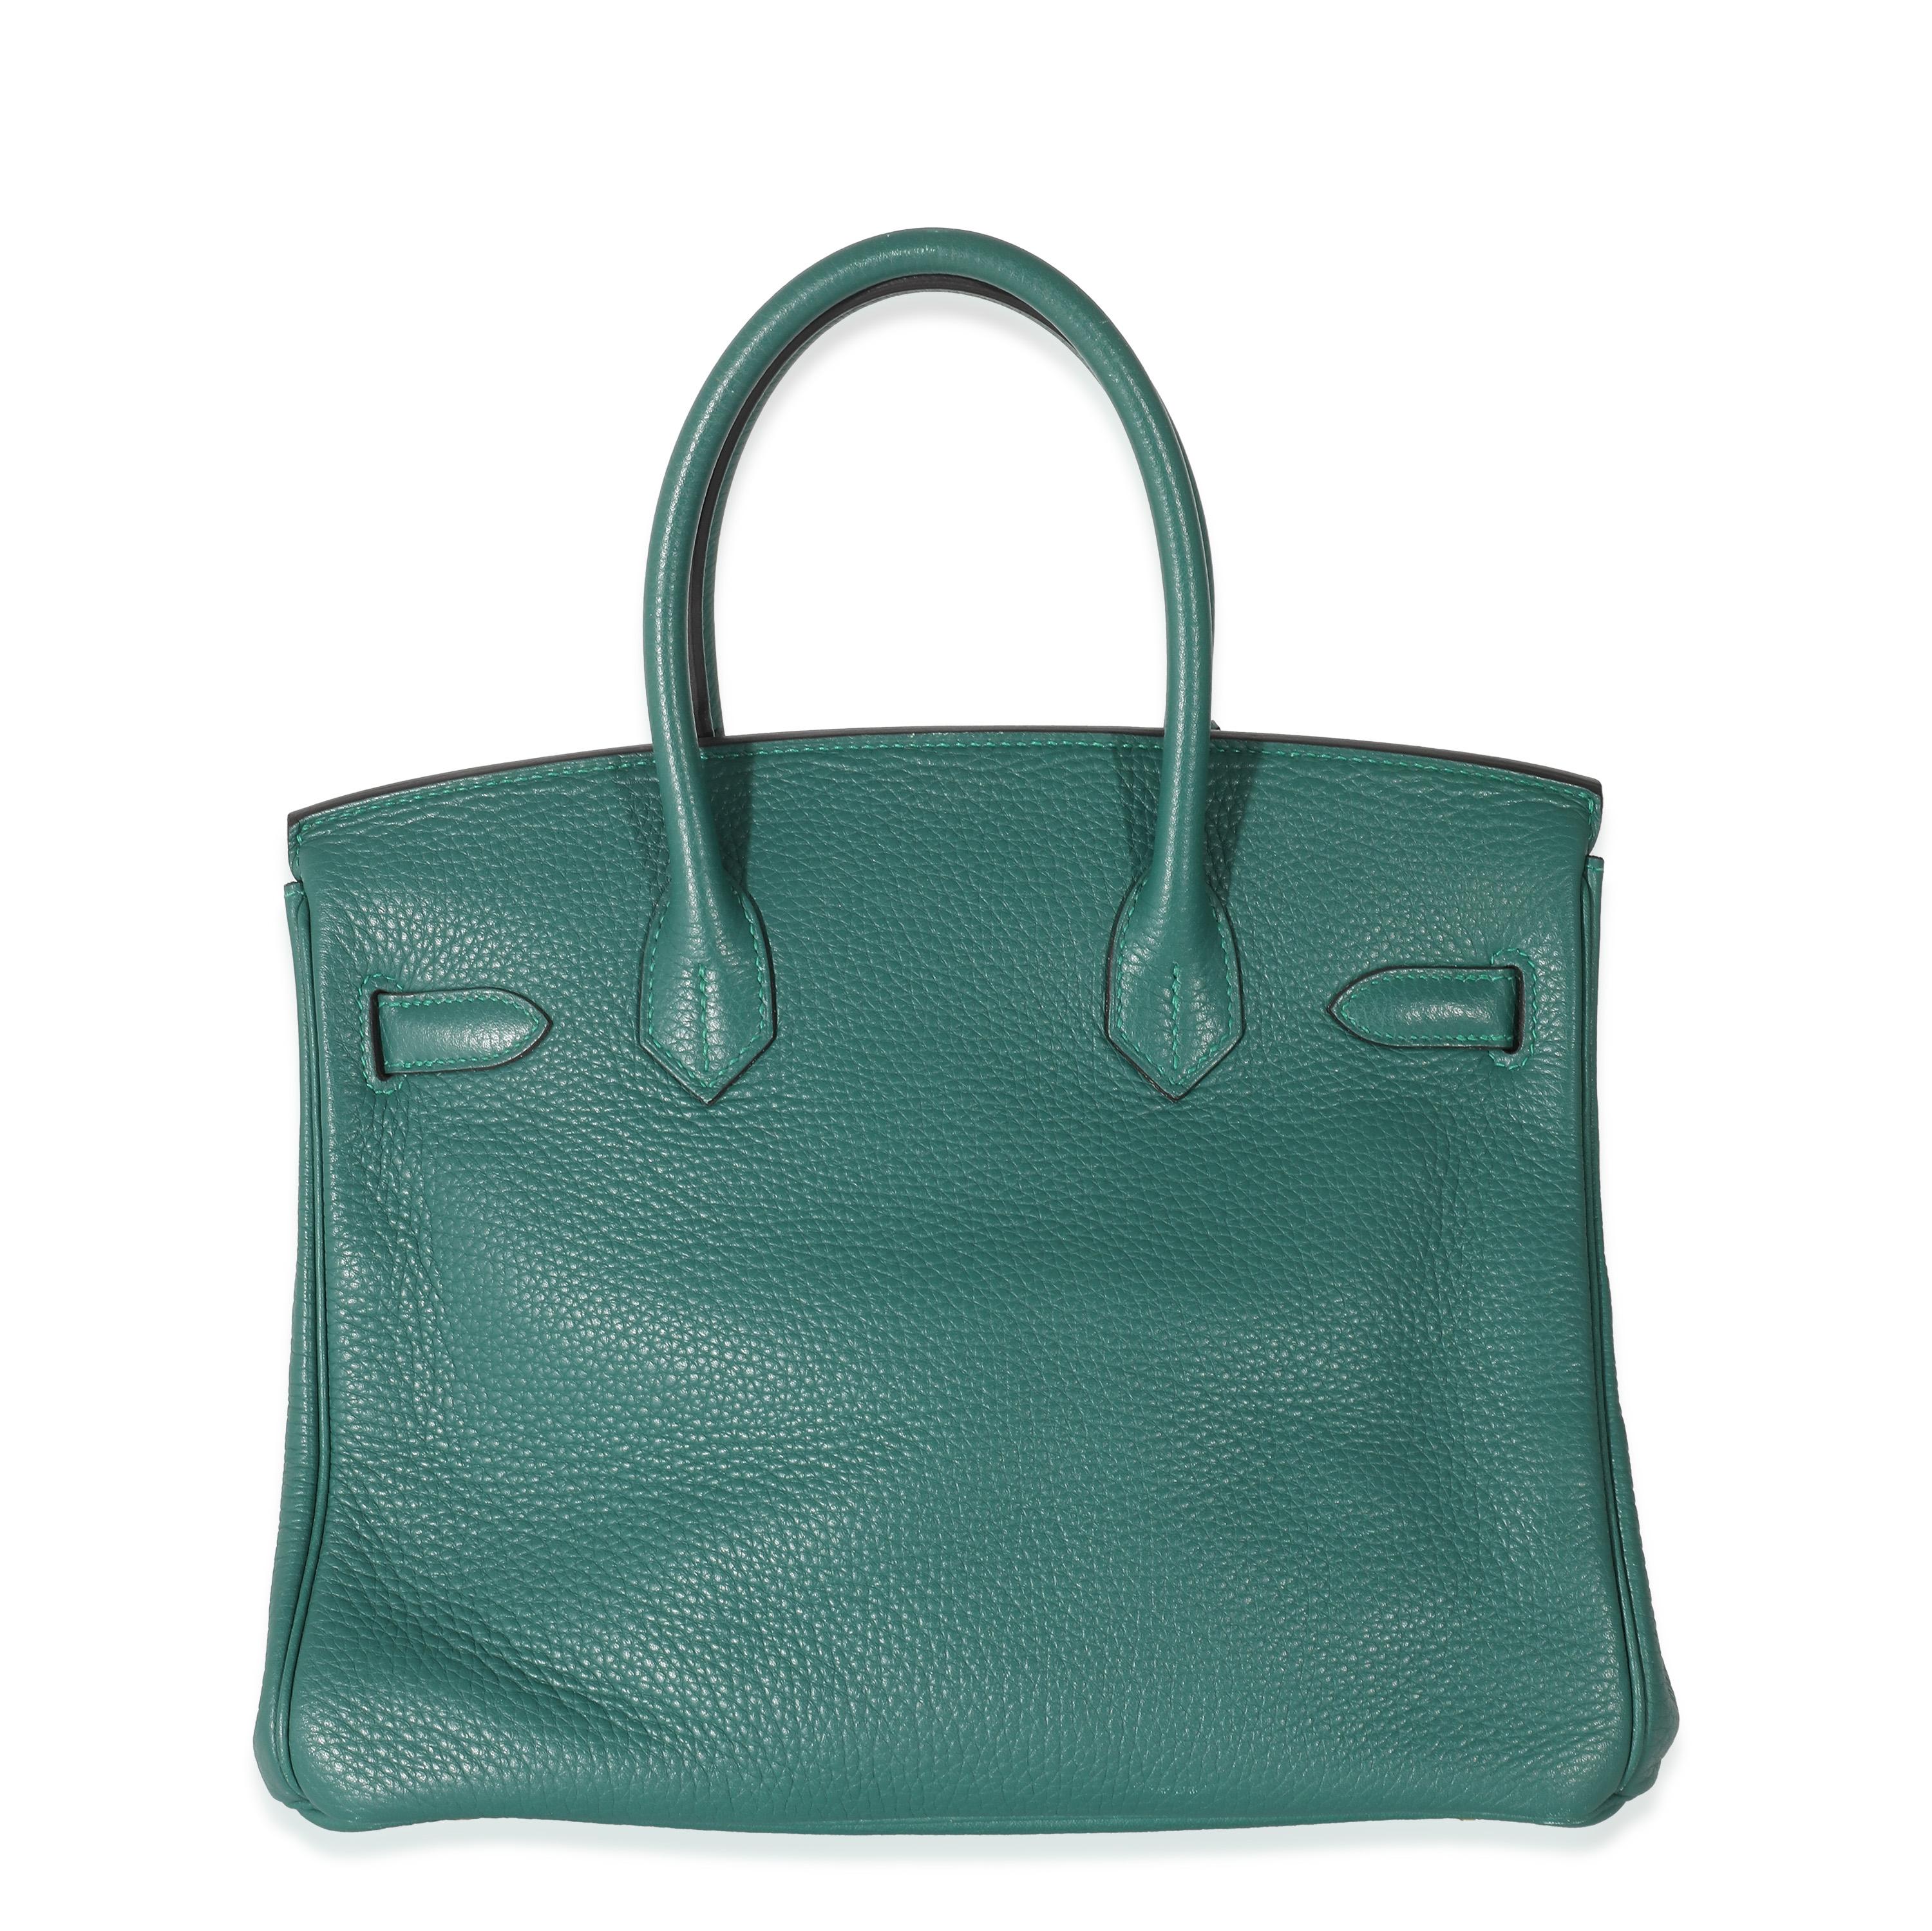 Listing Title: Hermes Clemence Malachite Birkin 30 GHW
SKU: 134241
Condition: Pre-owned 
Handbag Condition: Very Good
Condition Comments: Item is in very good condition with minor signs of wear. Exterior scuffing along lining. Scratching to